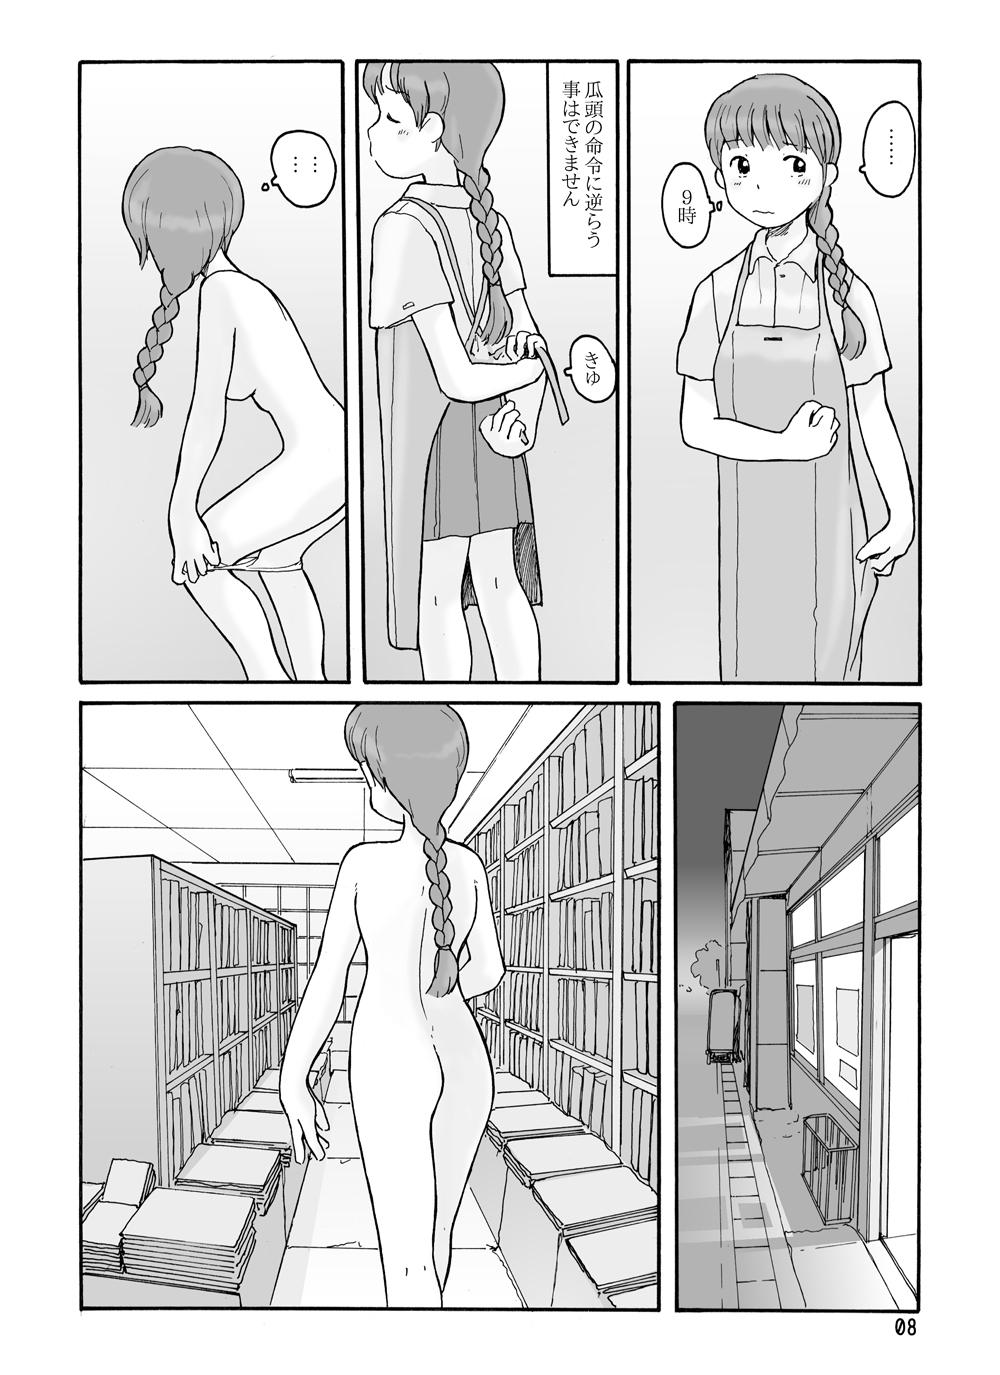 Livesex 南蓑荷 DLver Office - Page 7